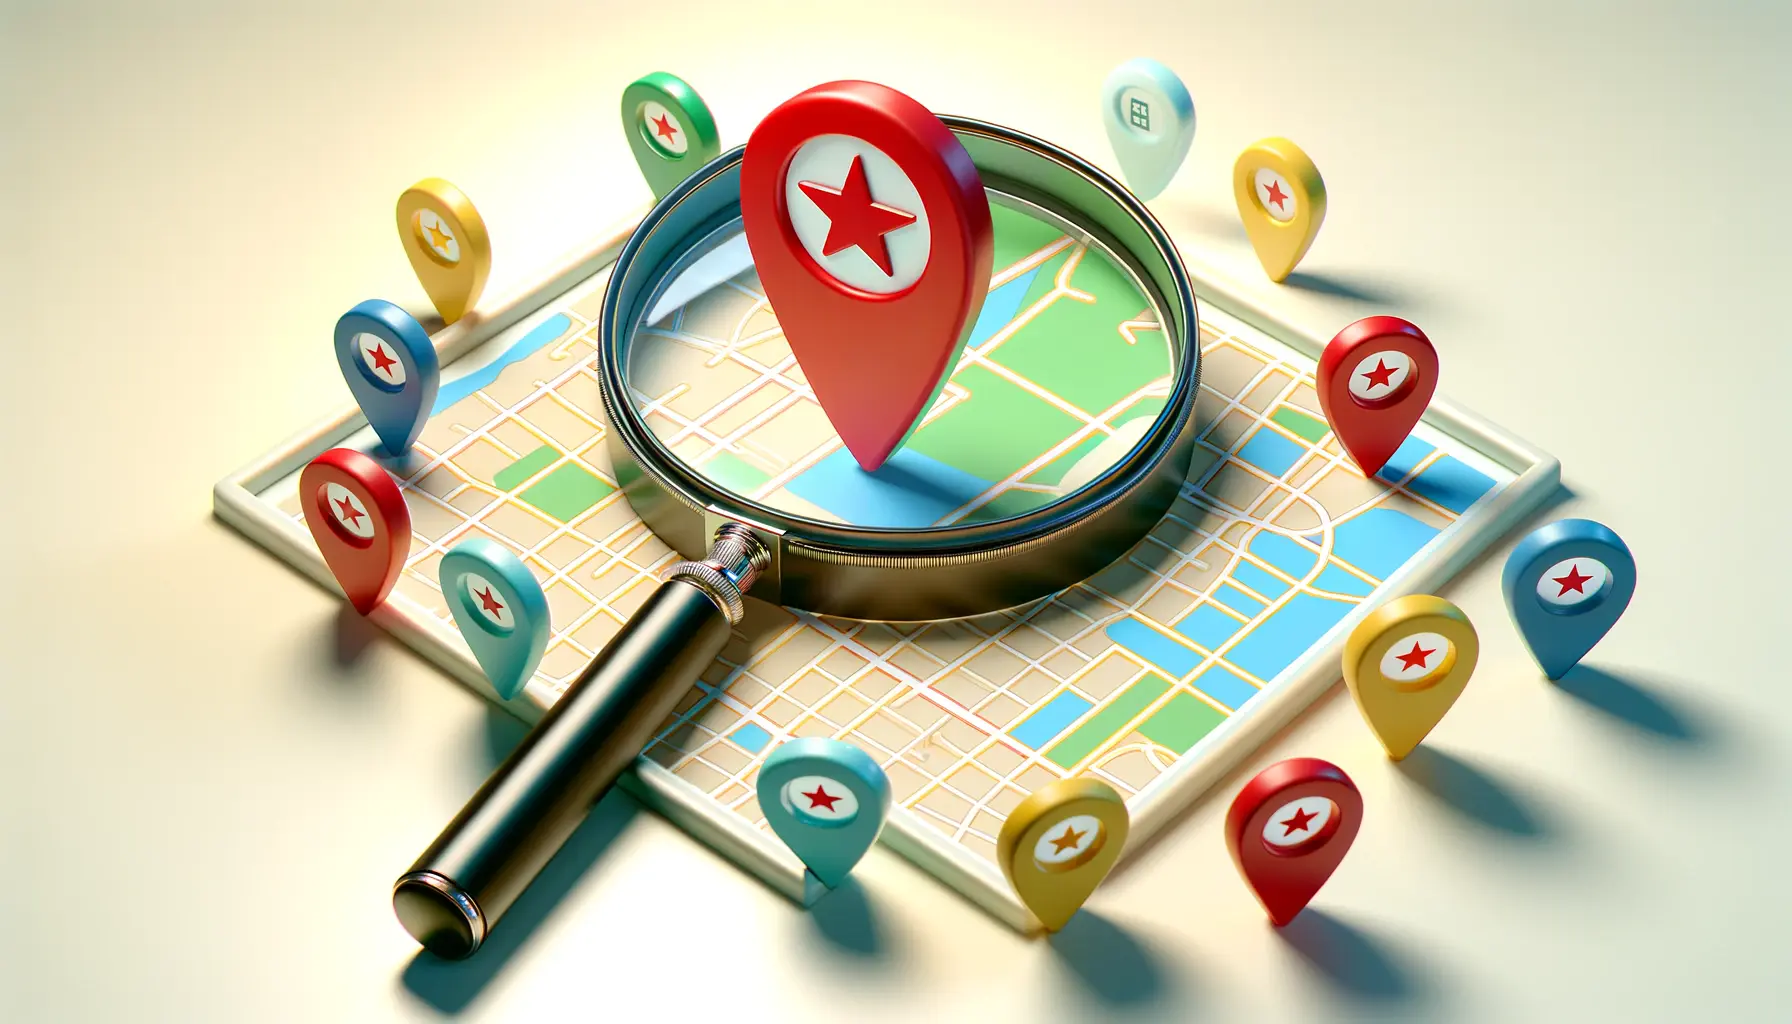 Yelp SEO Tactics for Local Business Listings